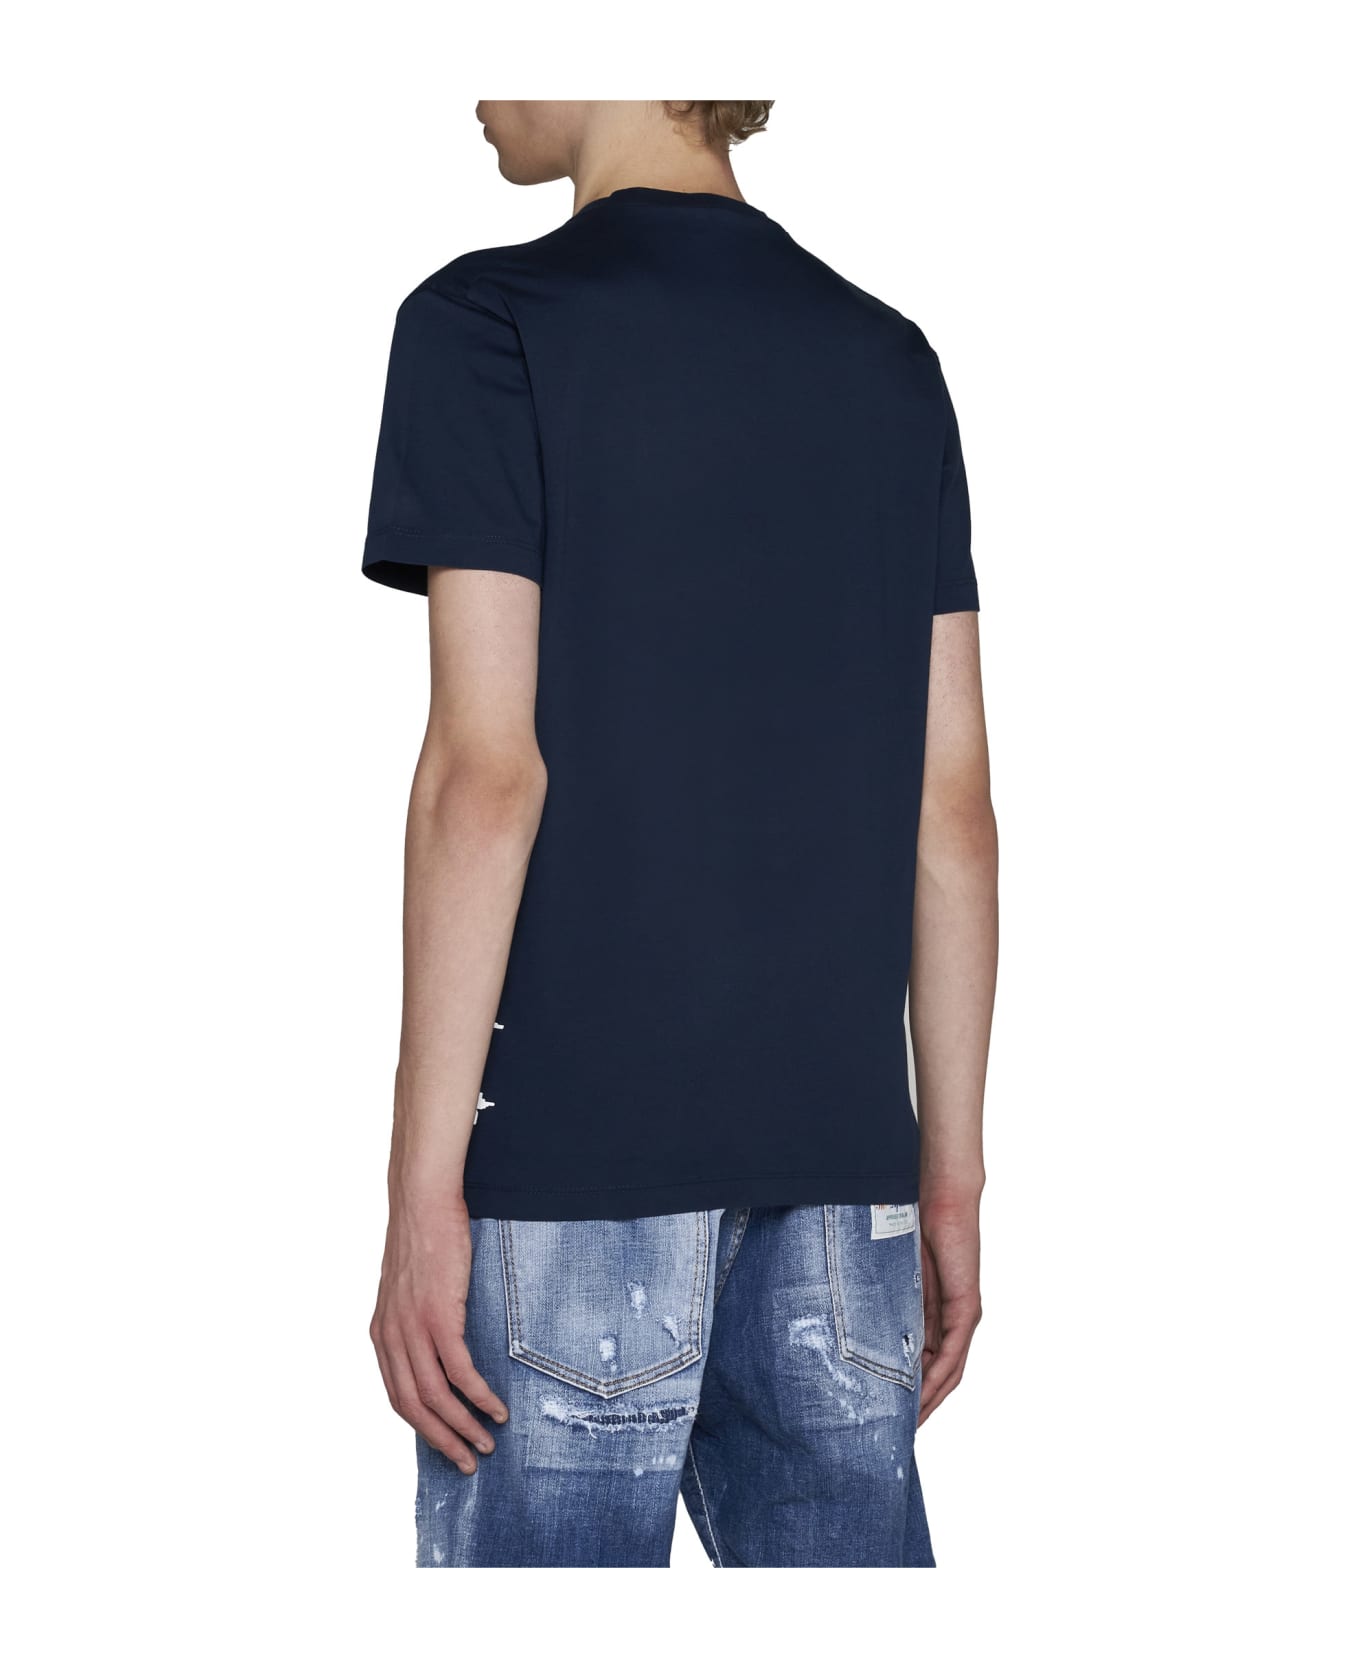 Dsquared2 T-shirt - Blue navy シャツ